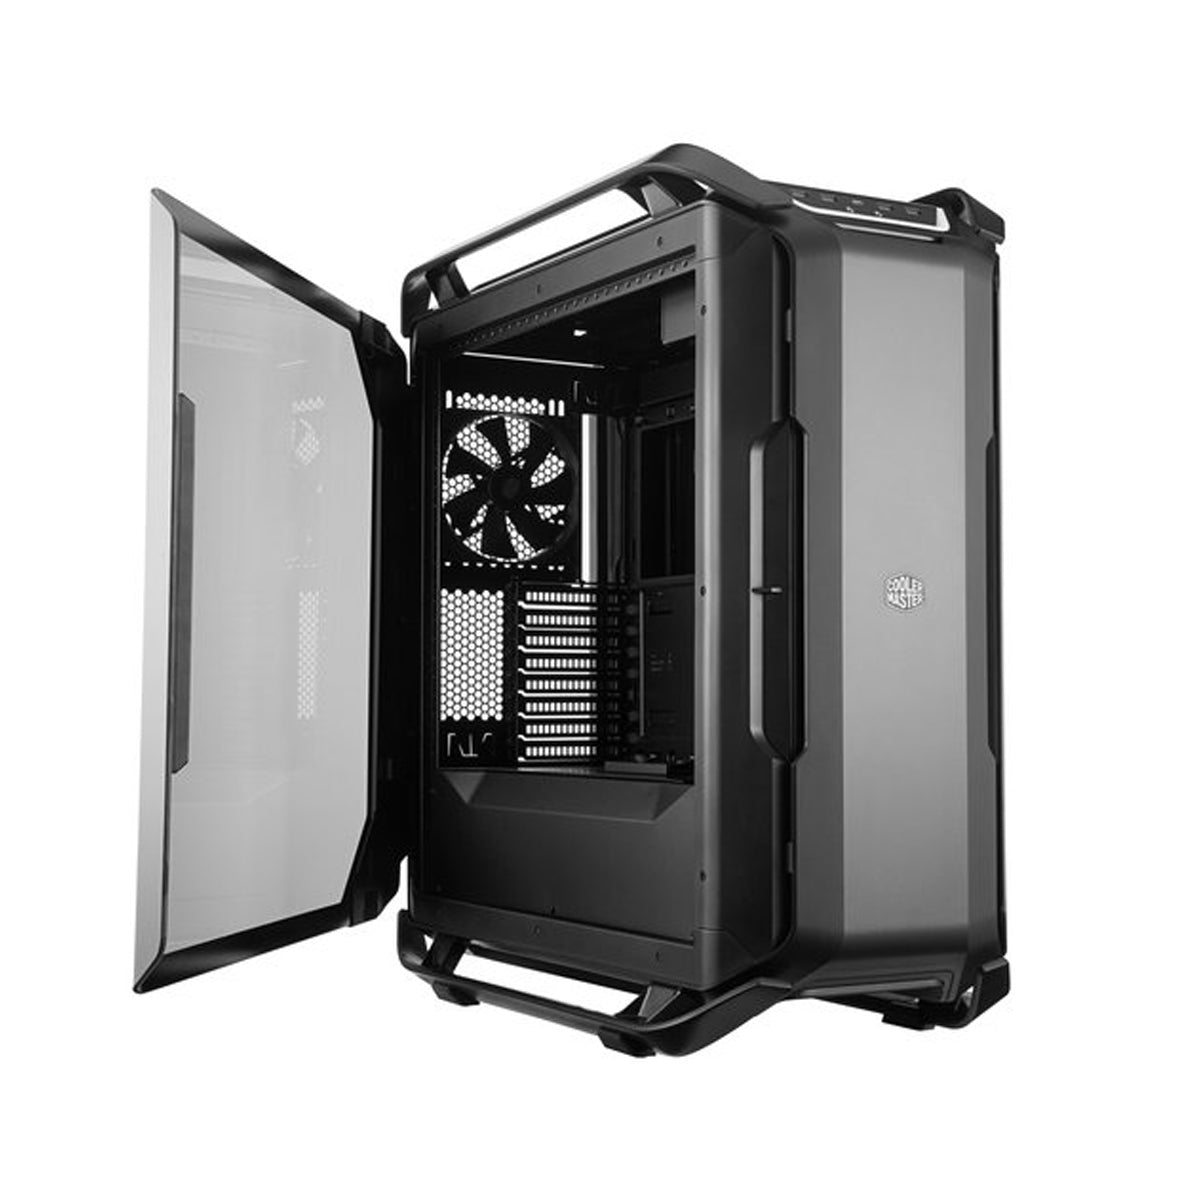 Cooler Master - Intel Core i9 - 2TB M.2 SSD - RTX 3090 - Waterkoeling - GamePC.BCM100101 - WiFi